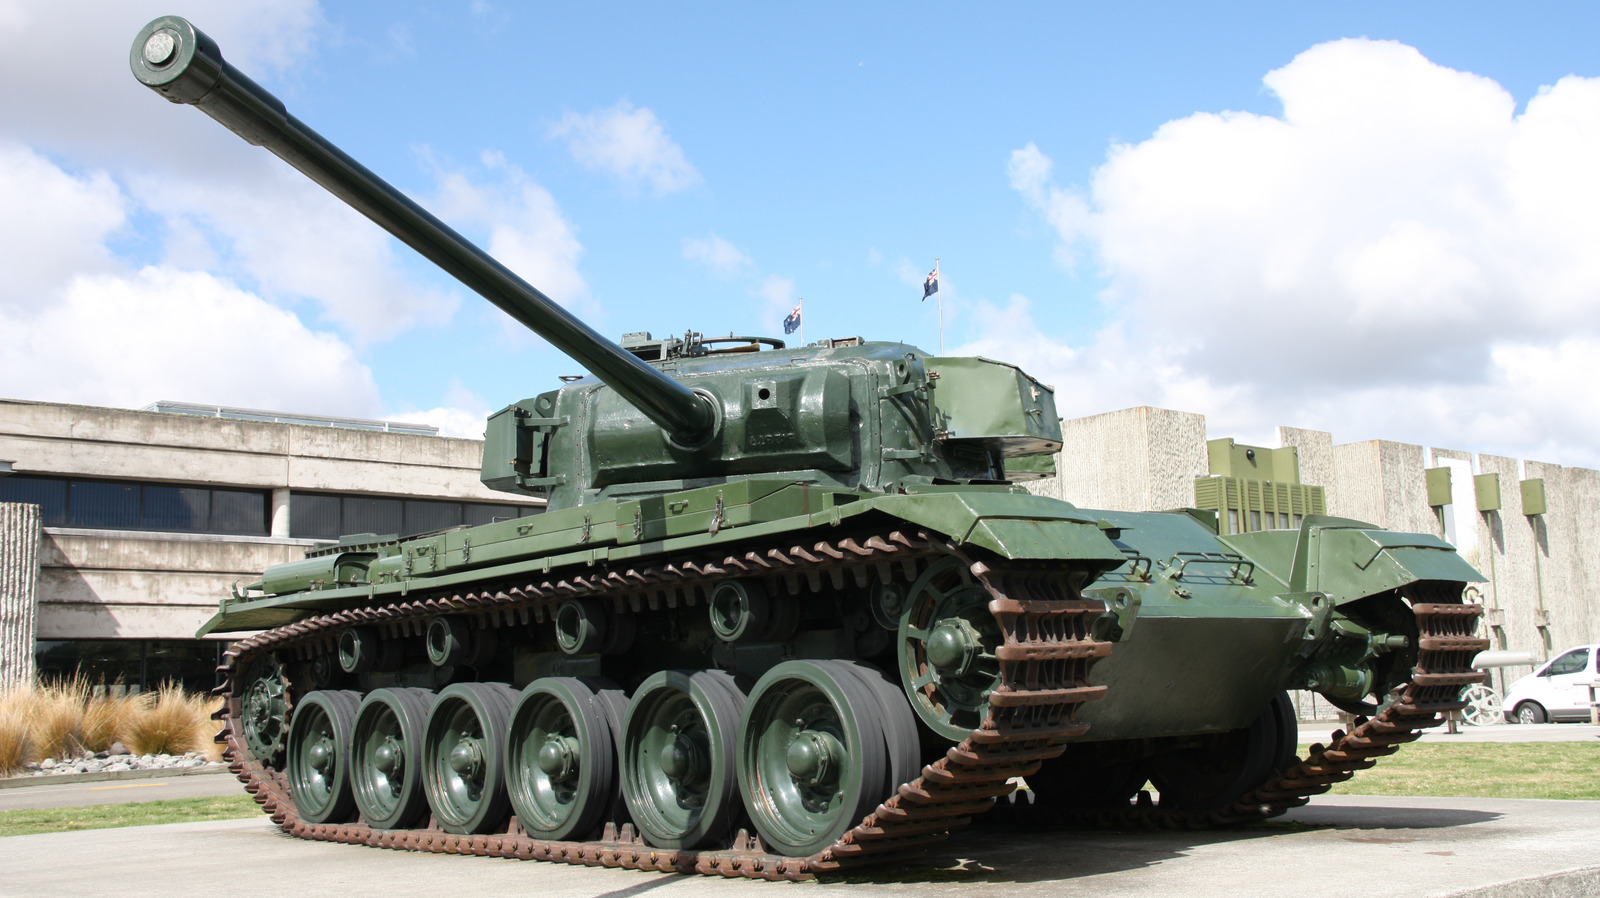 Here's What Made The Centurion One Of The Most Important Tanks In British AFV History